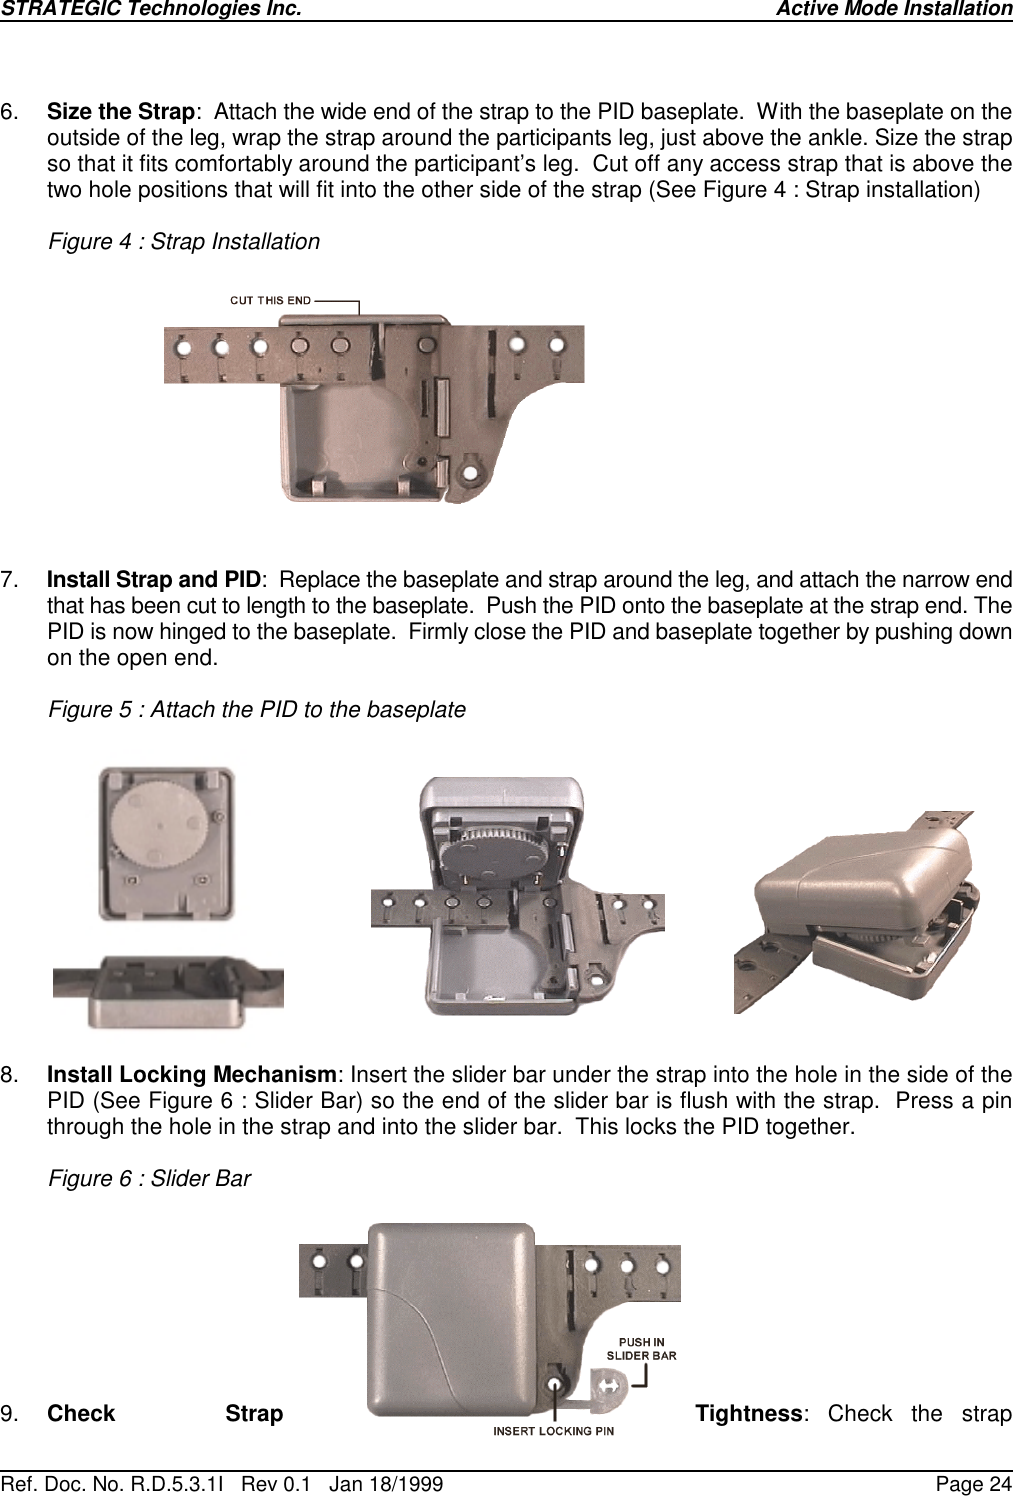 STRATEGIC Technologies Inc.Ref. Doc. No. R.D.5.3.1I   Rev 0.1   Jan 18/1999 Active Mode InstallationPage 246. Size the Strap:  Attach the wide end of the strap to the PID baseplate.  With the baseplate on theoutside of the leg, wrap the strap around the participants leg, just above the ankle. Size the strapso that it fits comfortably around the participant’s leg.  Cut off any access strap that is above thetwo hole positions that will fit into the other side of the strap (See Figure 4 : Strap installation)Figure 4 : Strap Installation7. Install Strap and PID:  Replace the baseplate and strap around the leg, and attach the narrow endthat has been cut to length to the baseplate.  Push the PID onto the baseplate at the strap end. ThePID is now hinged to the baseplate.  Firmly close the PID and baseplate together by pushing downon the open end.Figure 5 : Attach the PID to the baseplate8. Install Locking Mechanism: Insert the slider bar under the strap into the hole in the side of thePID (See Figure 6 : Slider Bar) so the end of the slider bar is flush with the strap.  Press a pinthrough the hole in the strap and into the slider bar.  This locks the PID together.Figure 6 : Slider Bar9. Check Strap Tightness: Check the strap